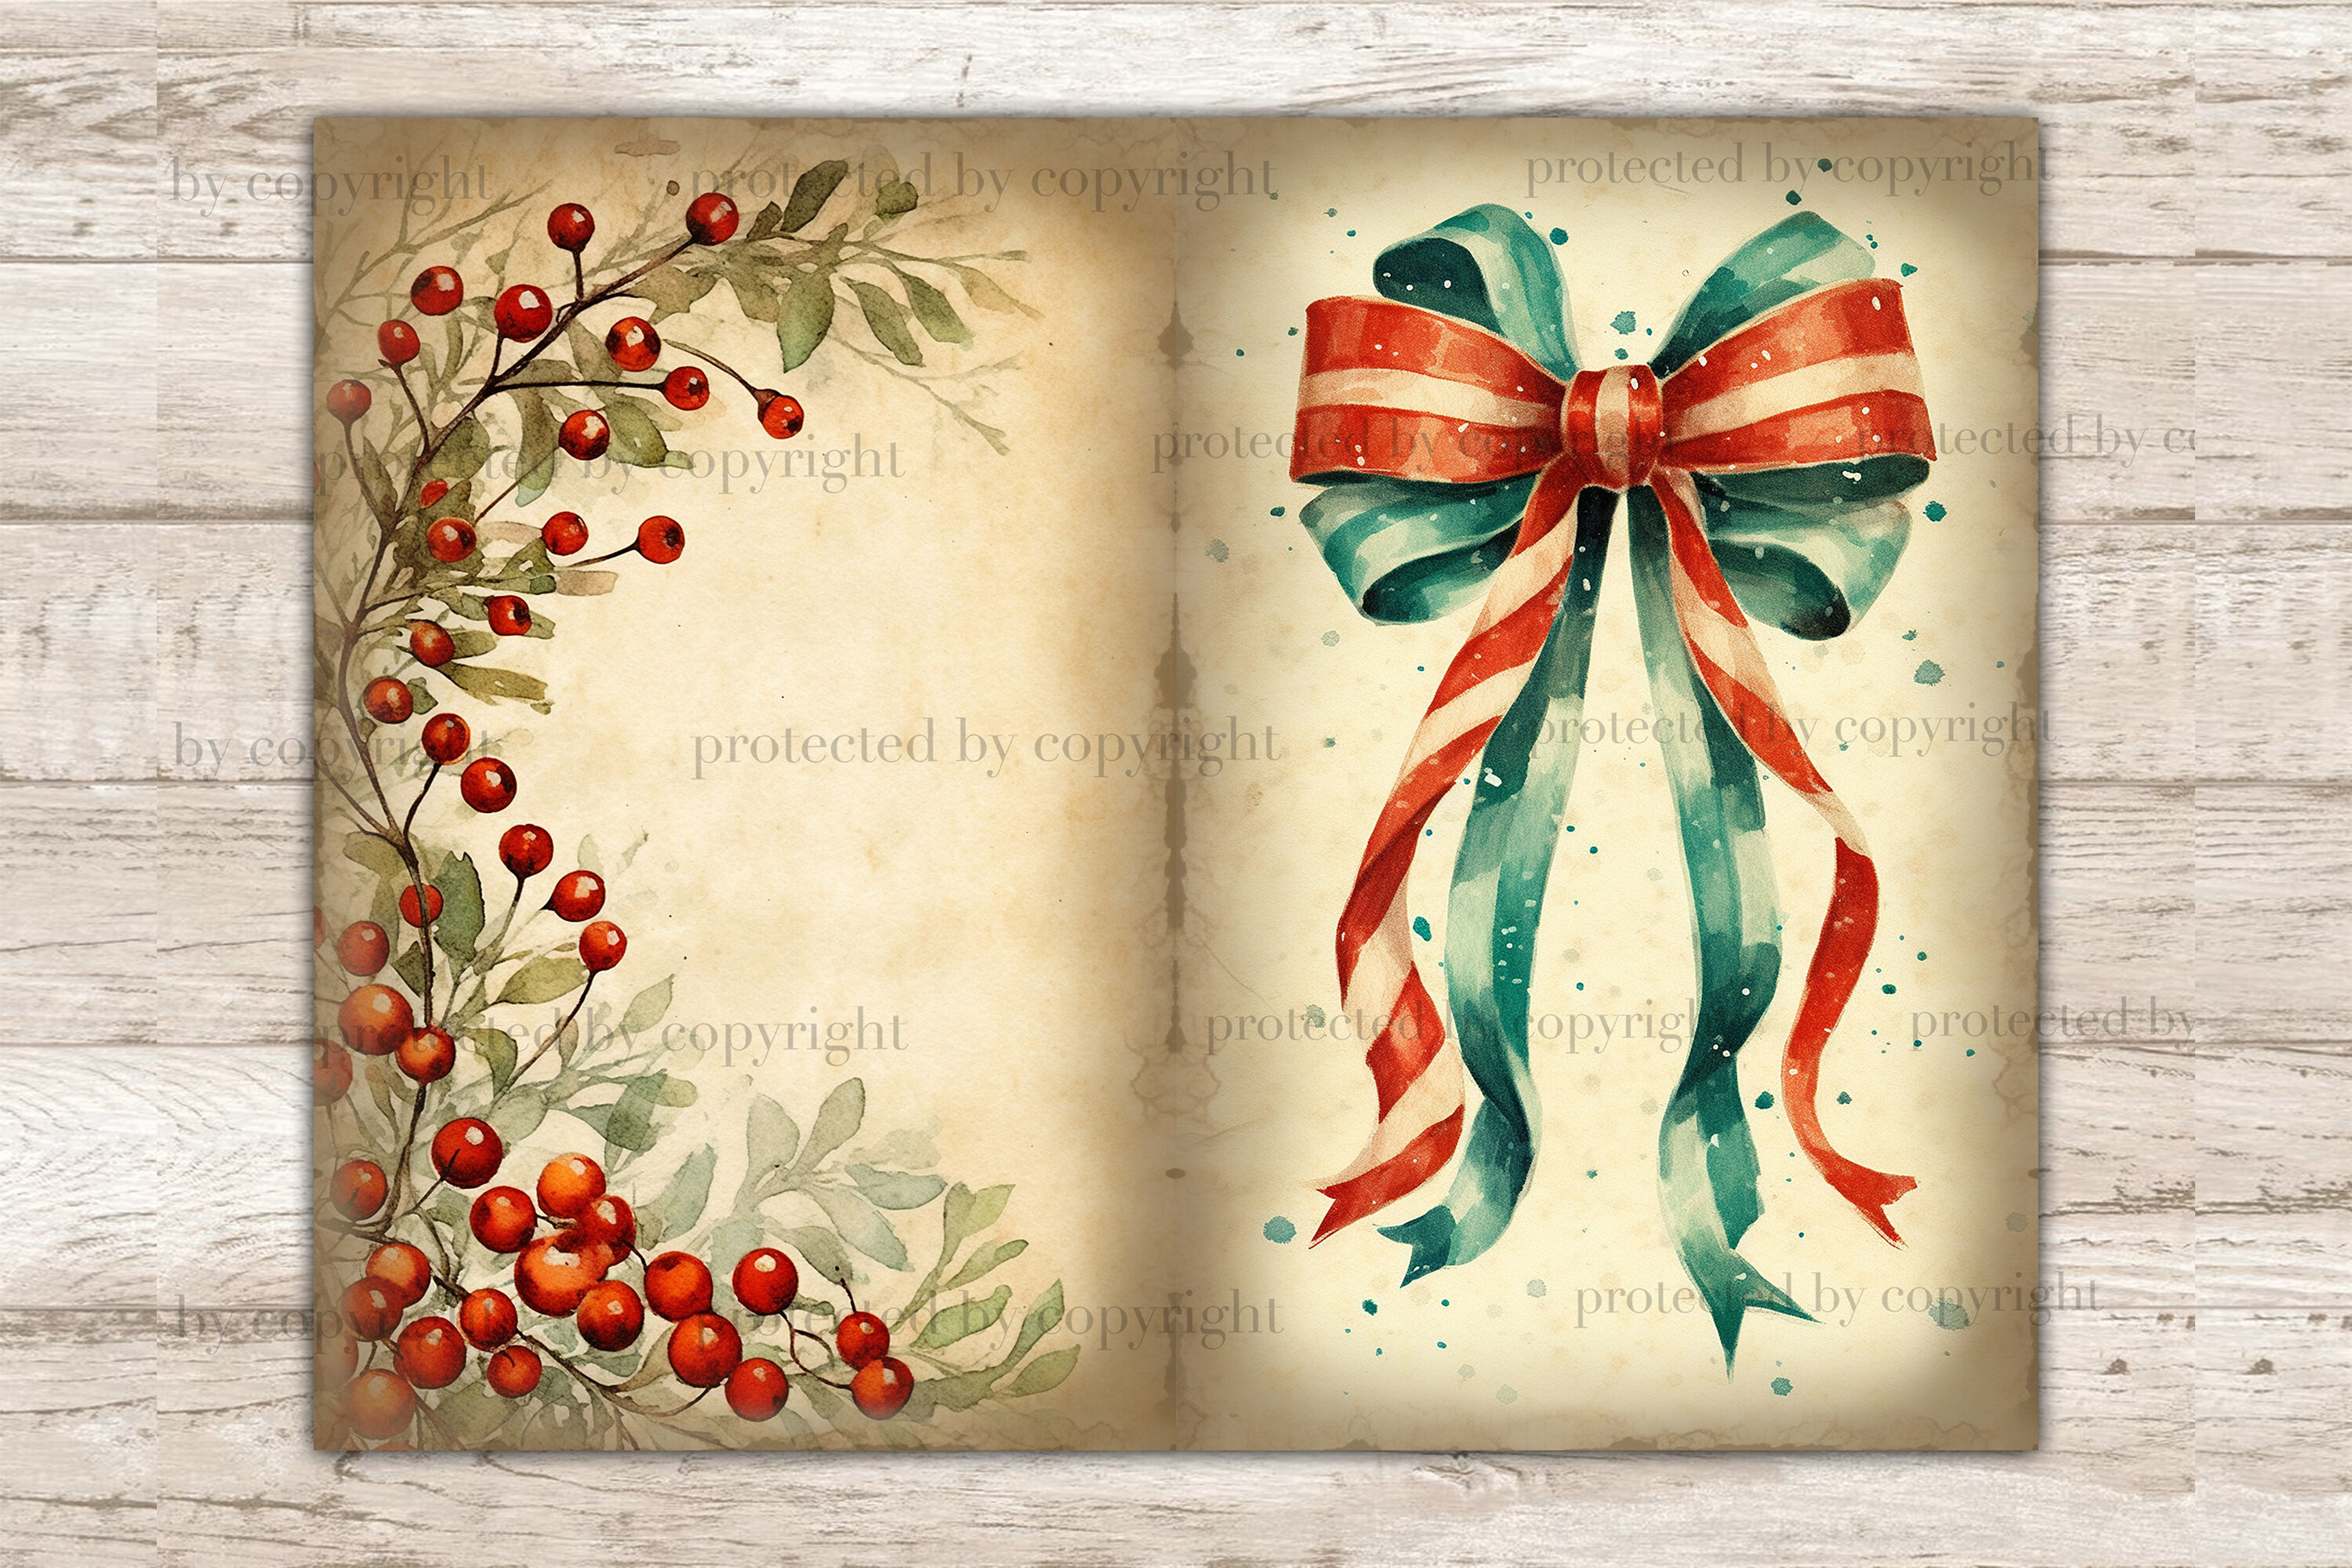 Christmas Wishes Junk Journal Kit, Winter Collage Printables